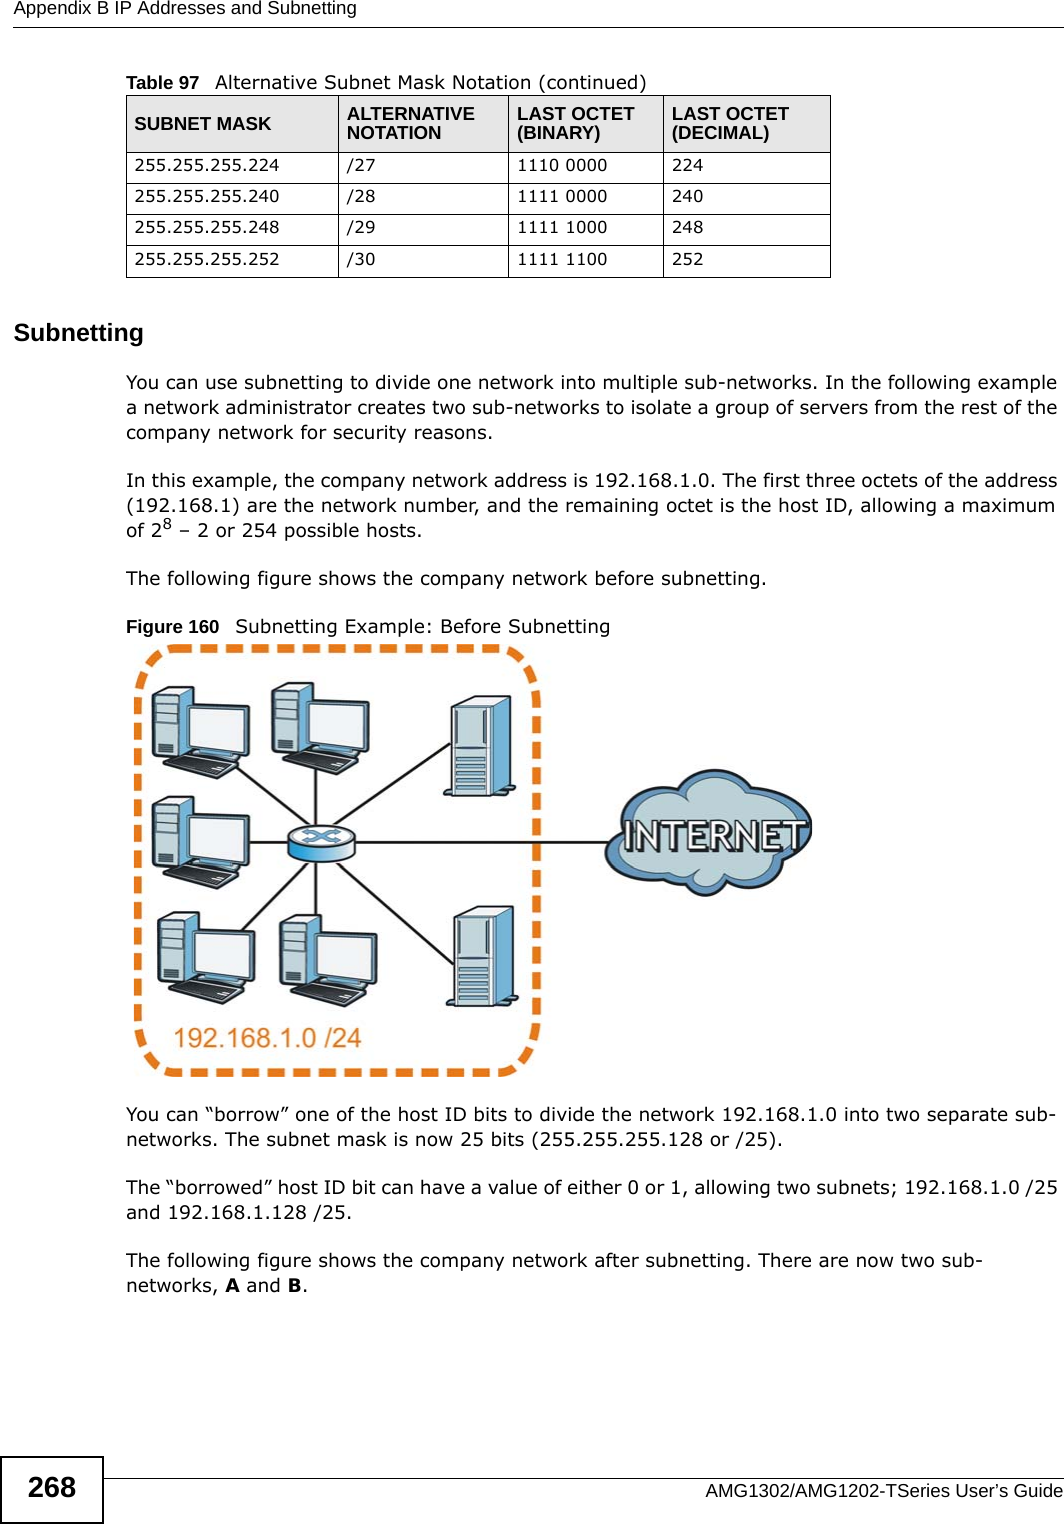 Appendix B IP Addresses and SubnettingAMG1302/AMG1202-TSeries User’s Guide268SubnettingYou can use subnetting to divide one network into multiple sub-networks. In the following example a network administrator creates two sub-networks to isolate a group of servers from the rest of the company network for security reasons.In this example, the company network address is 192.168.1.0. The first three octets of the address (192.168.1) are the network number, and the remaining octet is the host ID, allowing a maximum of 28 – 2 or 254 possible hosts.The following figure shows the company network before subnetting.  Figure 160   Subnetting Example: Before SubnettingYou can “borrow” one of the host ID bits to divide the network 192.168.1.0 into two separate sub-networks. The subnet mask is now 25 bits (255.255.255.128 or /25).The “borrowed” host ID bit can have a value of either 0 or 1, allowing two subnets; 192.168.1.0 /25 and 192.168.1.128 /25. The following figure shows the company network after subnetting. There are now two sub-networks, A and B. 255.255.255.224 /27 1110 0000 224255.255.255.240 /28 1111 0000 240255.255.255.248 /29 1111 1000 248255.255.255.252 /30 1111 1100 252Table 97   Alternative Subnet Mask Notation (continued)SUBNET MASK ALTERNATIVE NOTATION LAST OCTET (BINARY) LAST OCTET (DECIMAL)